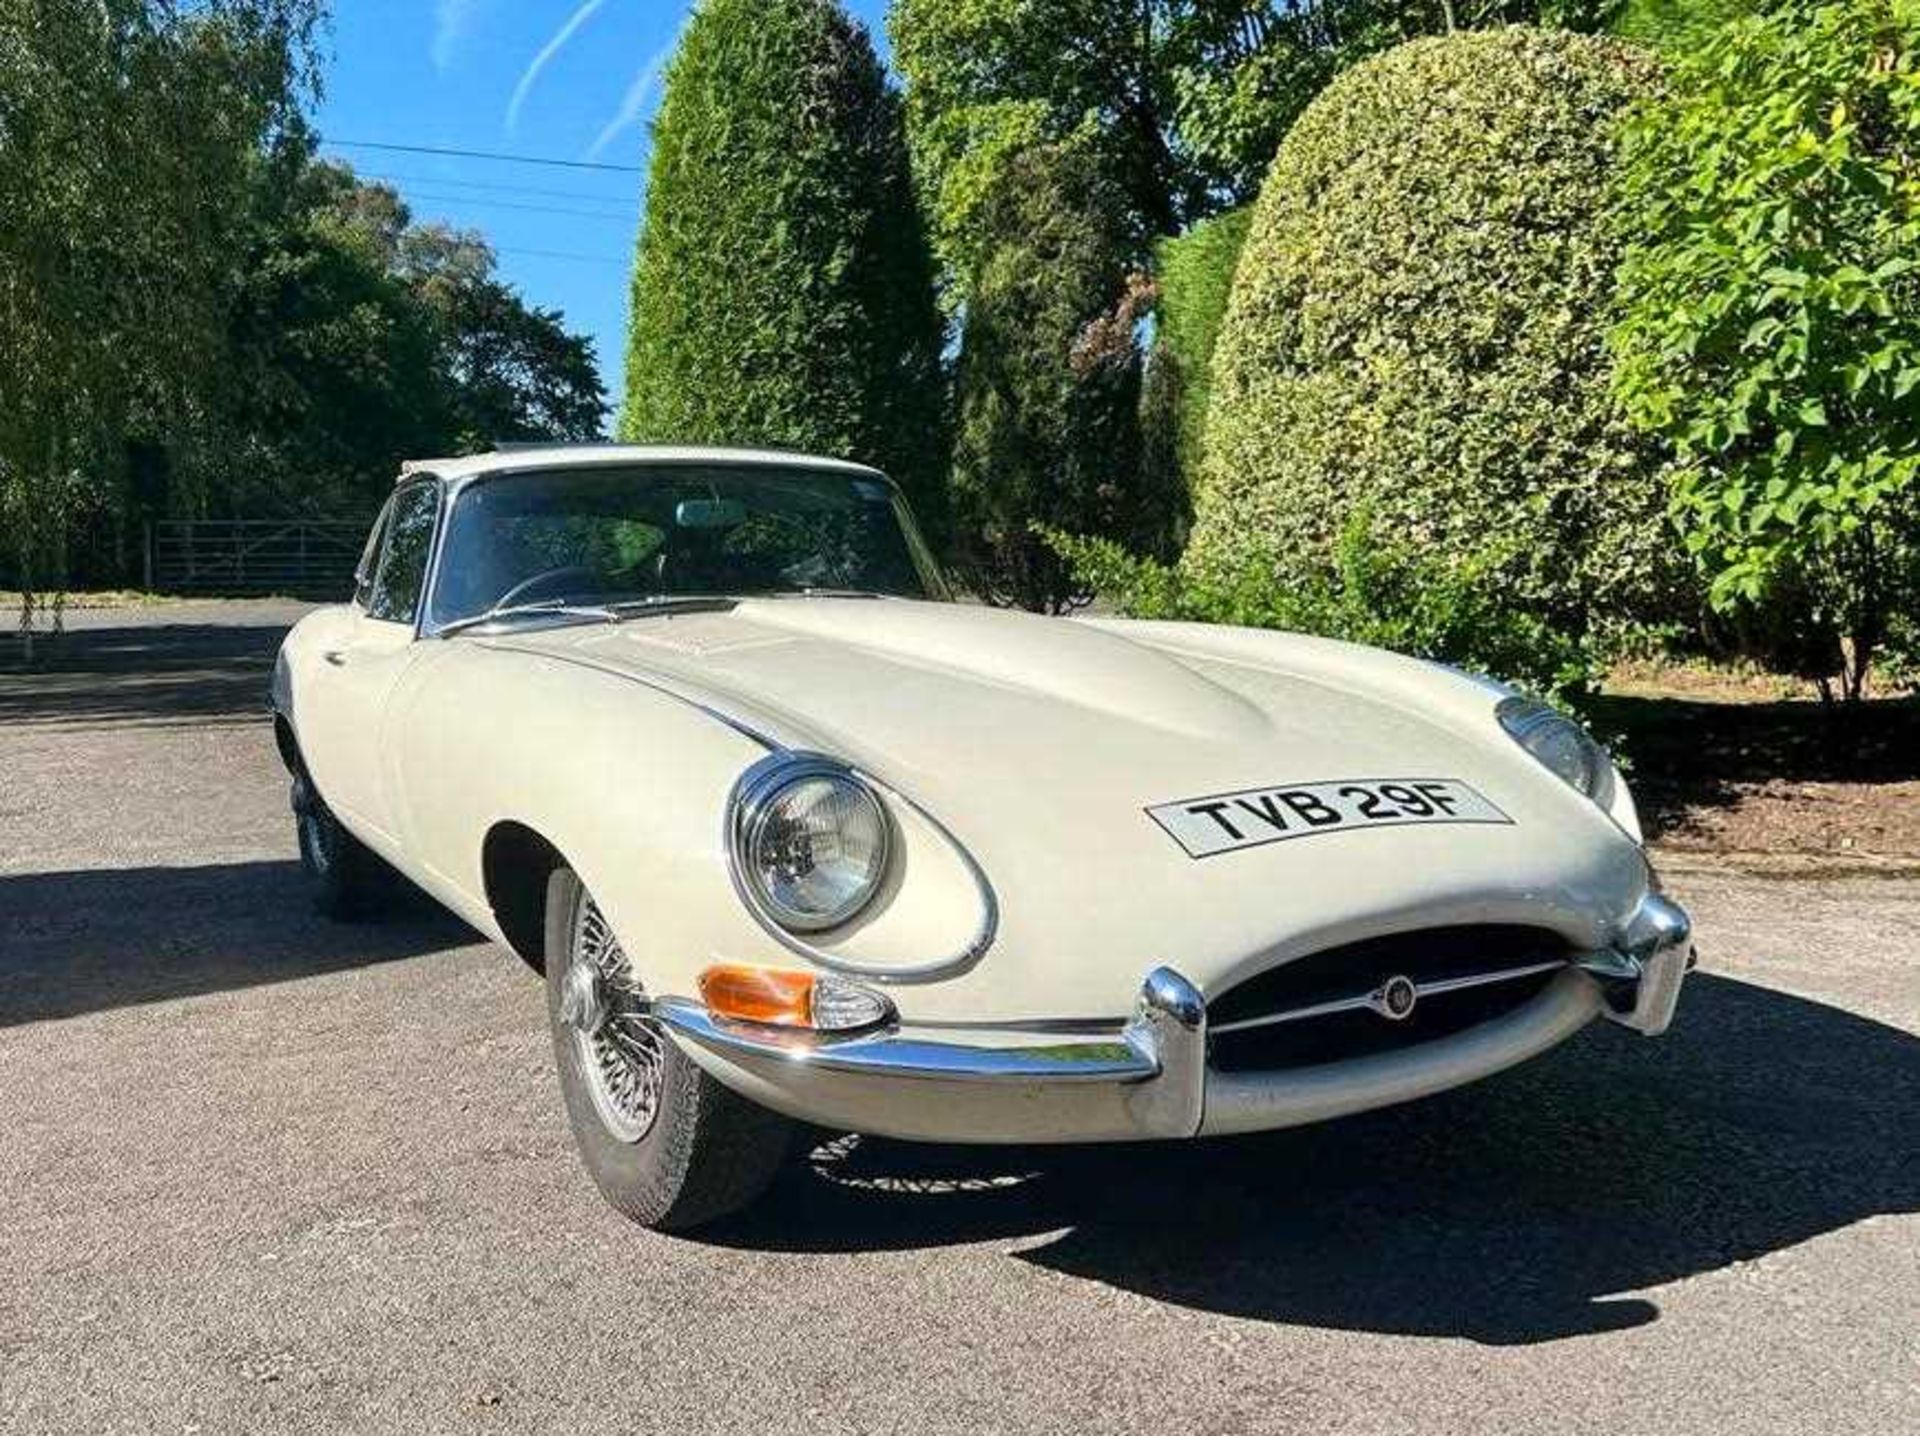 1968 Jaguar E-Type 4.2 Coupe Current ownership for more than 28 years